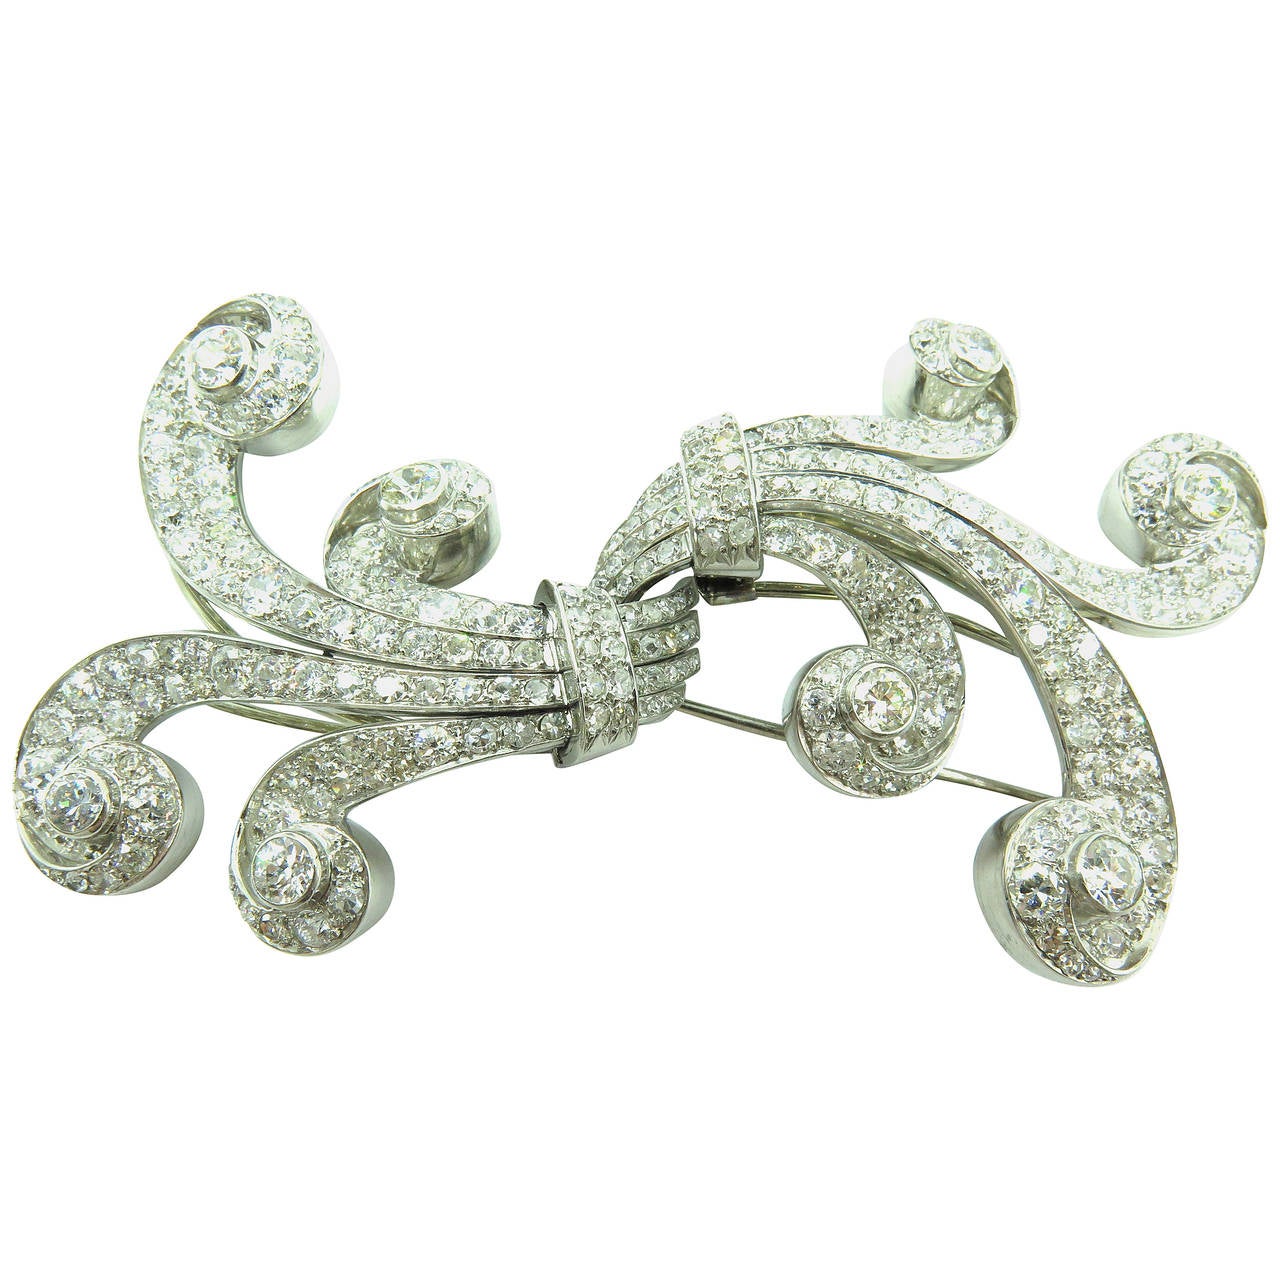 This large gorgeous flowing retro double dress clip can either be worn as 2 separate clips/pins or 1 very large important brooch. I can picture this piece being worn by Katherine Hepburn back in the 40's. There are approximately 13.50ct diamonds. It